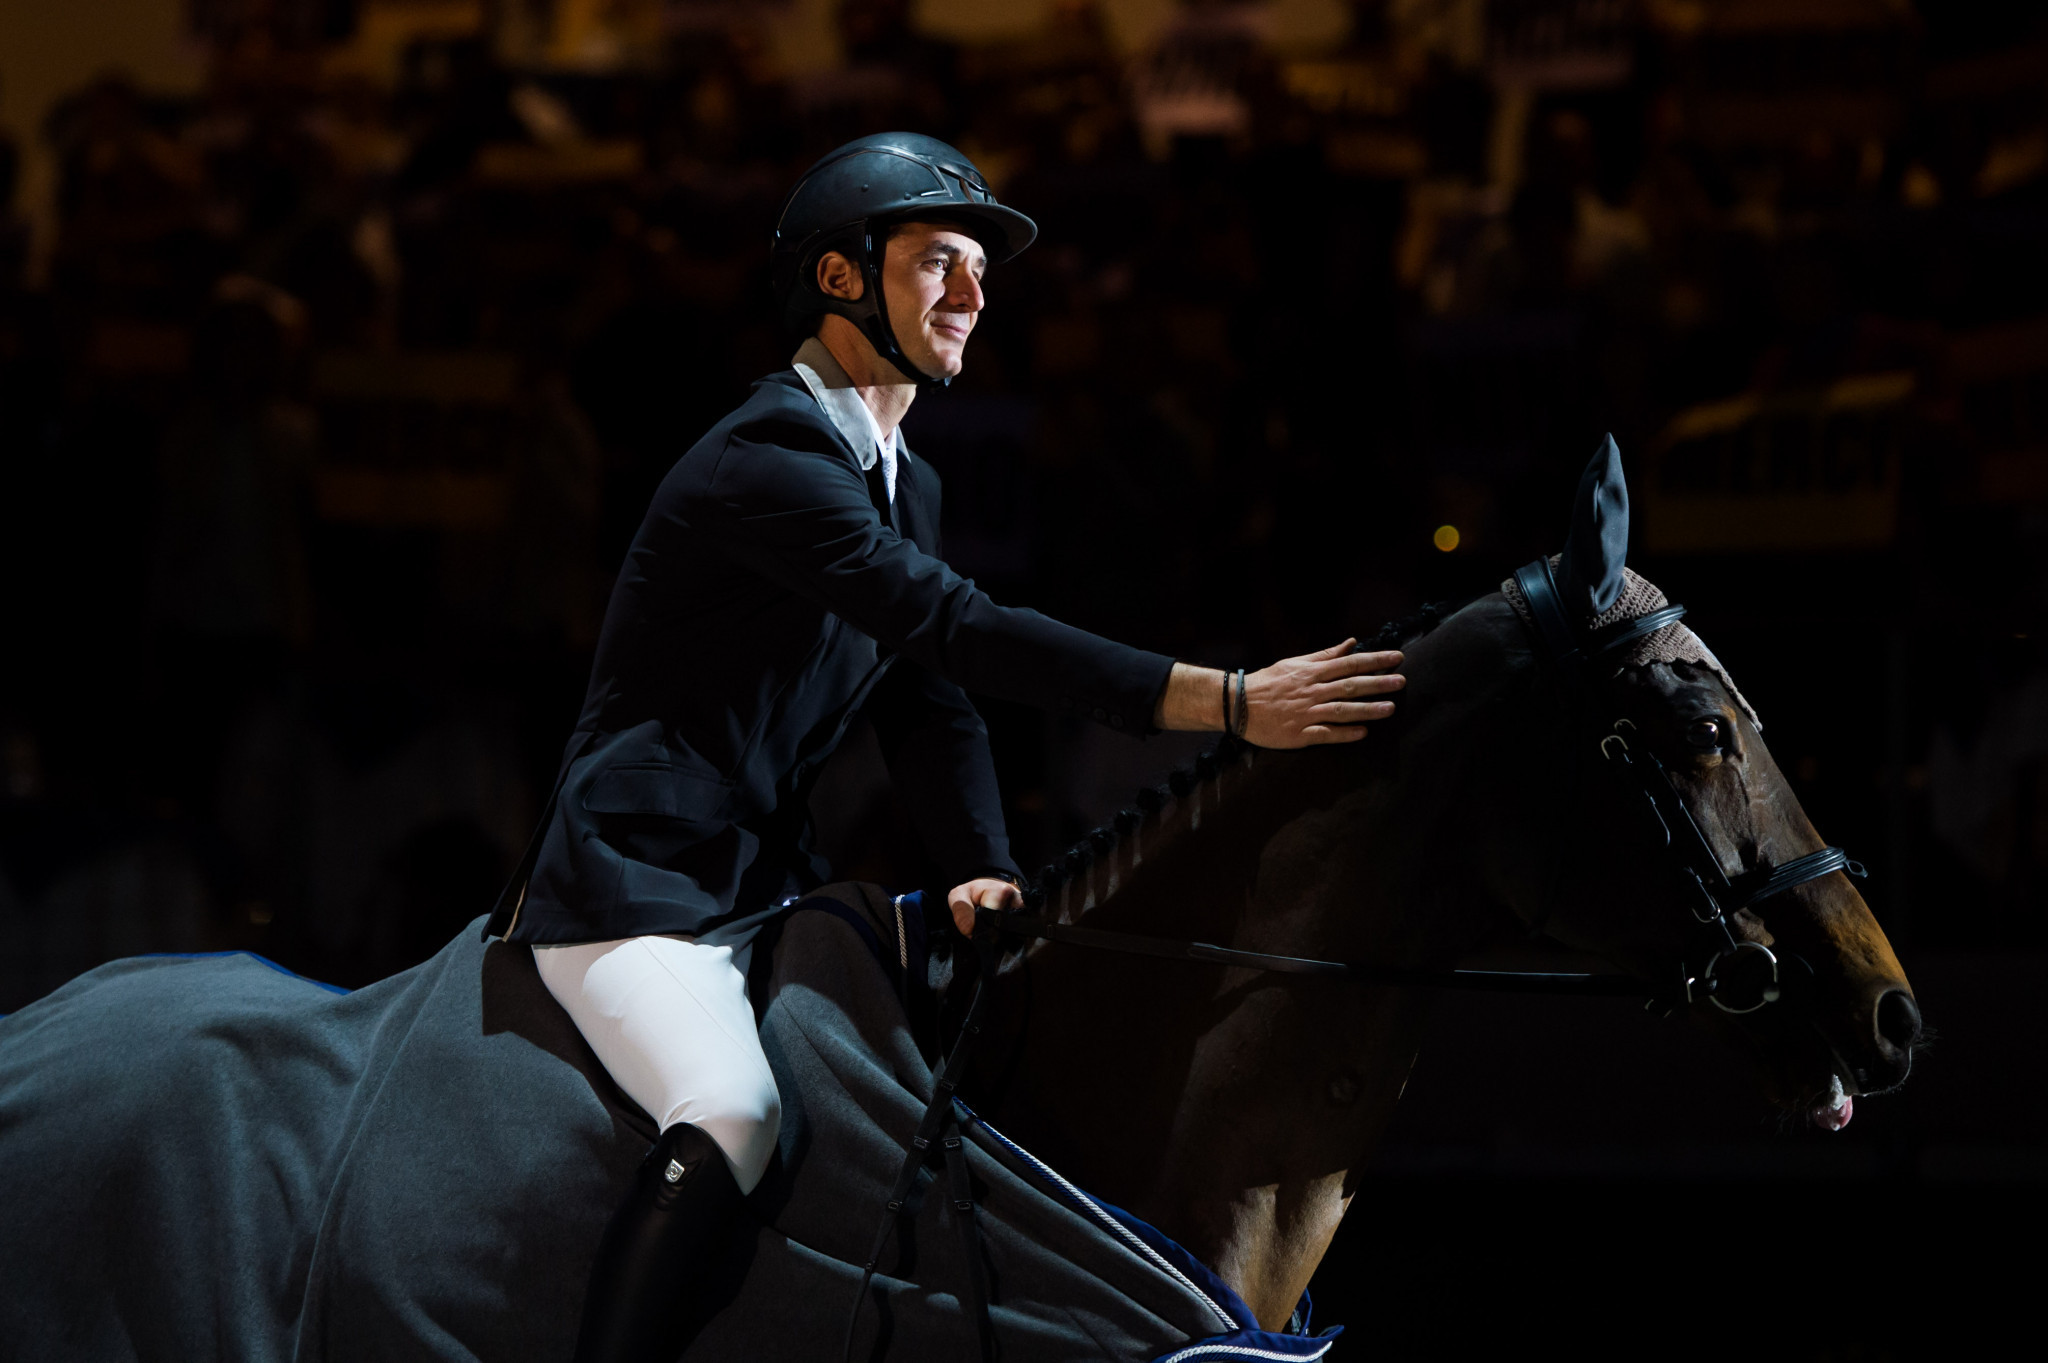 Steve Guerdat will be hoping for success on home soil at the upcoming Longines FEI Nations Cup in St Gallen ©Getty Images